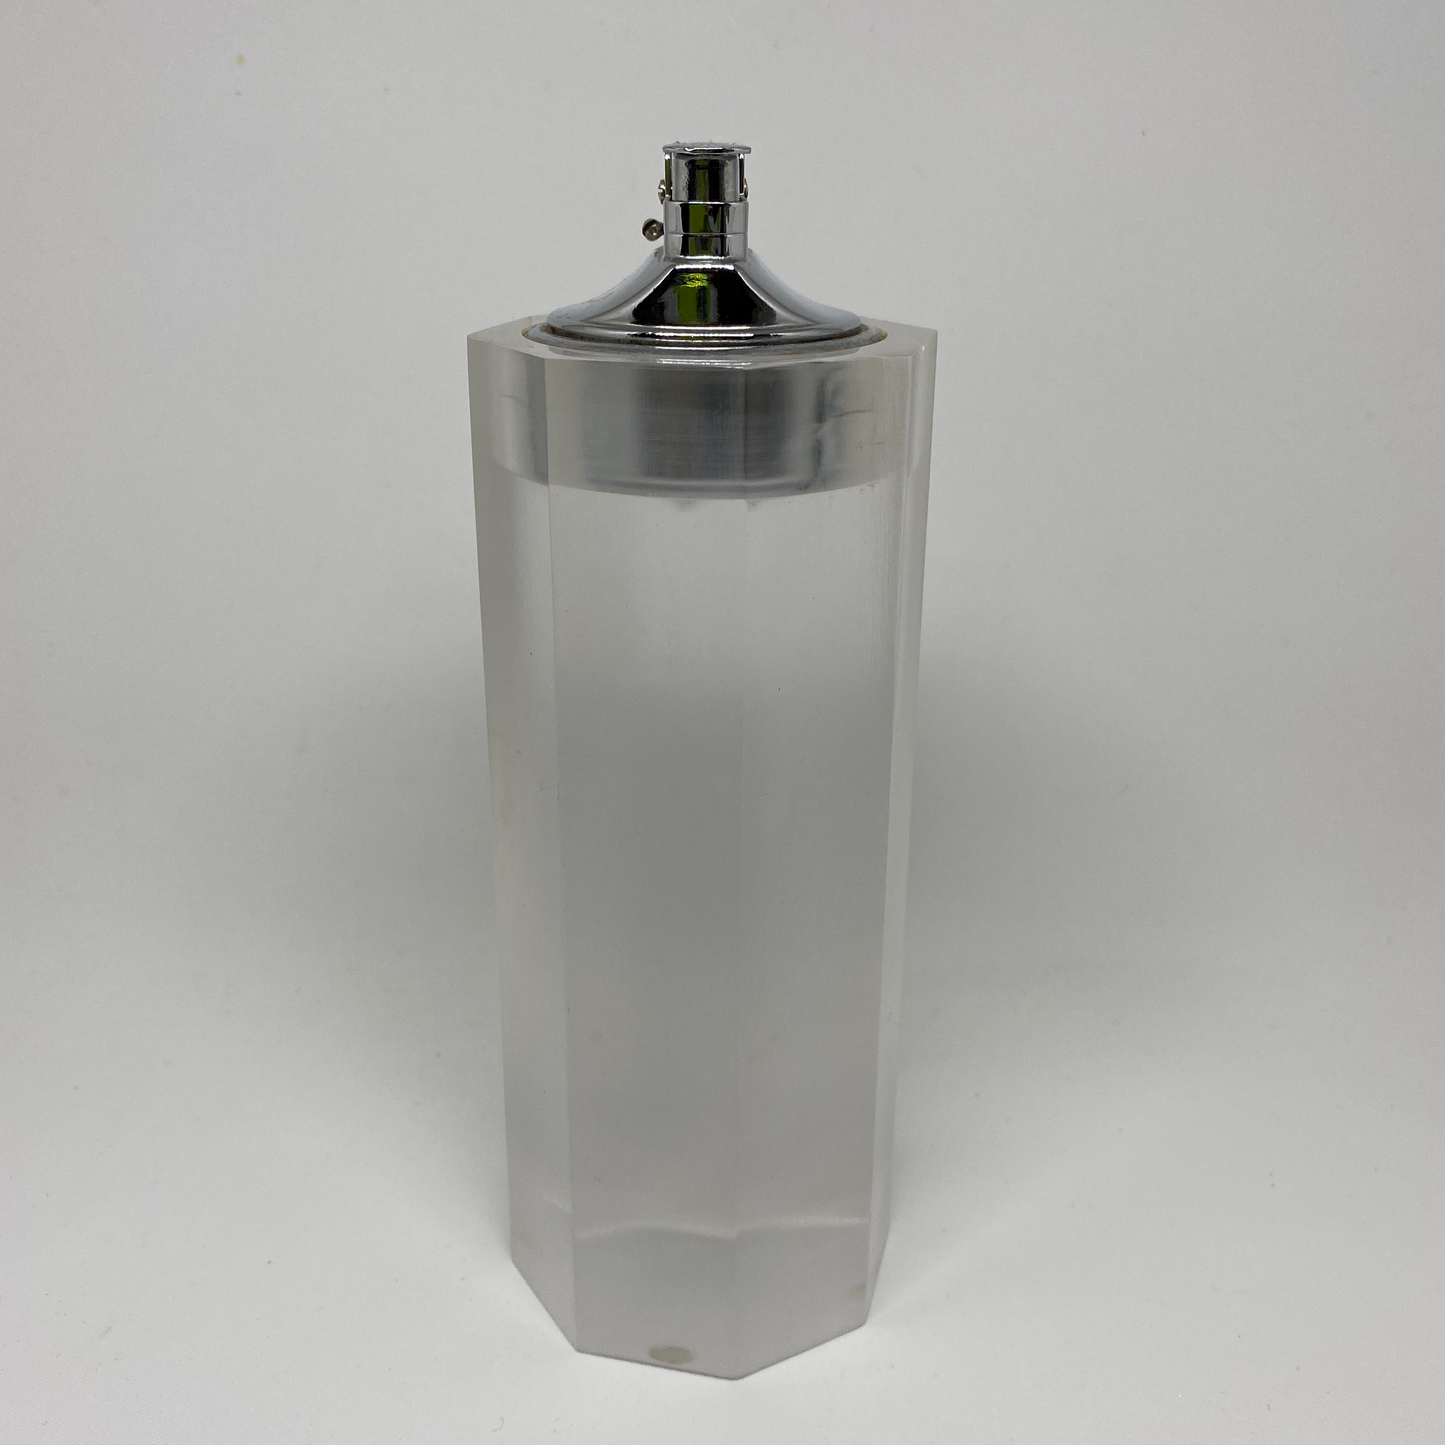 Opaque Lucite Faceted Table Lighter